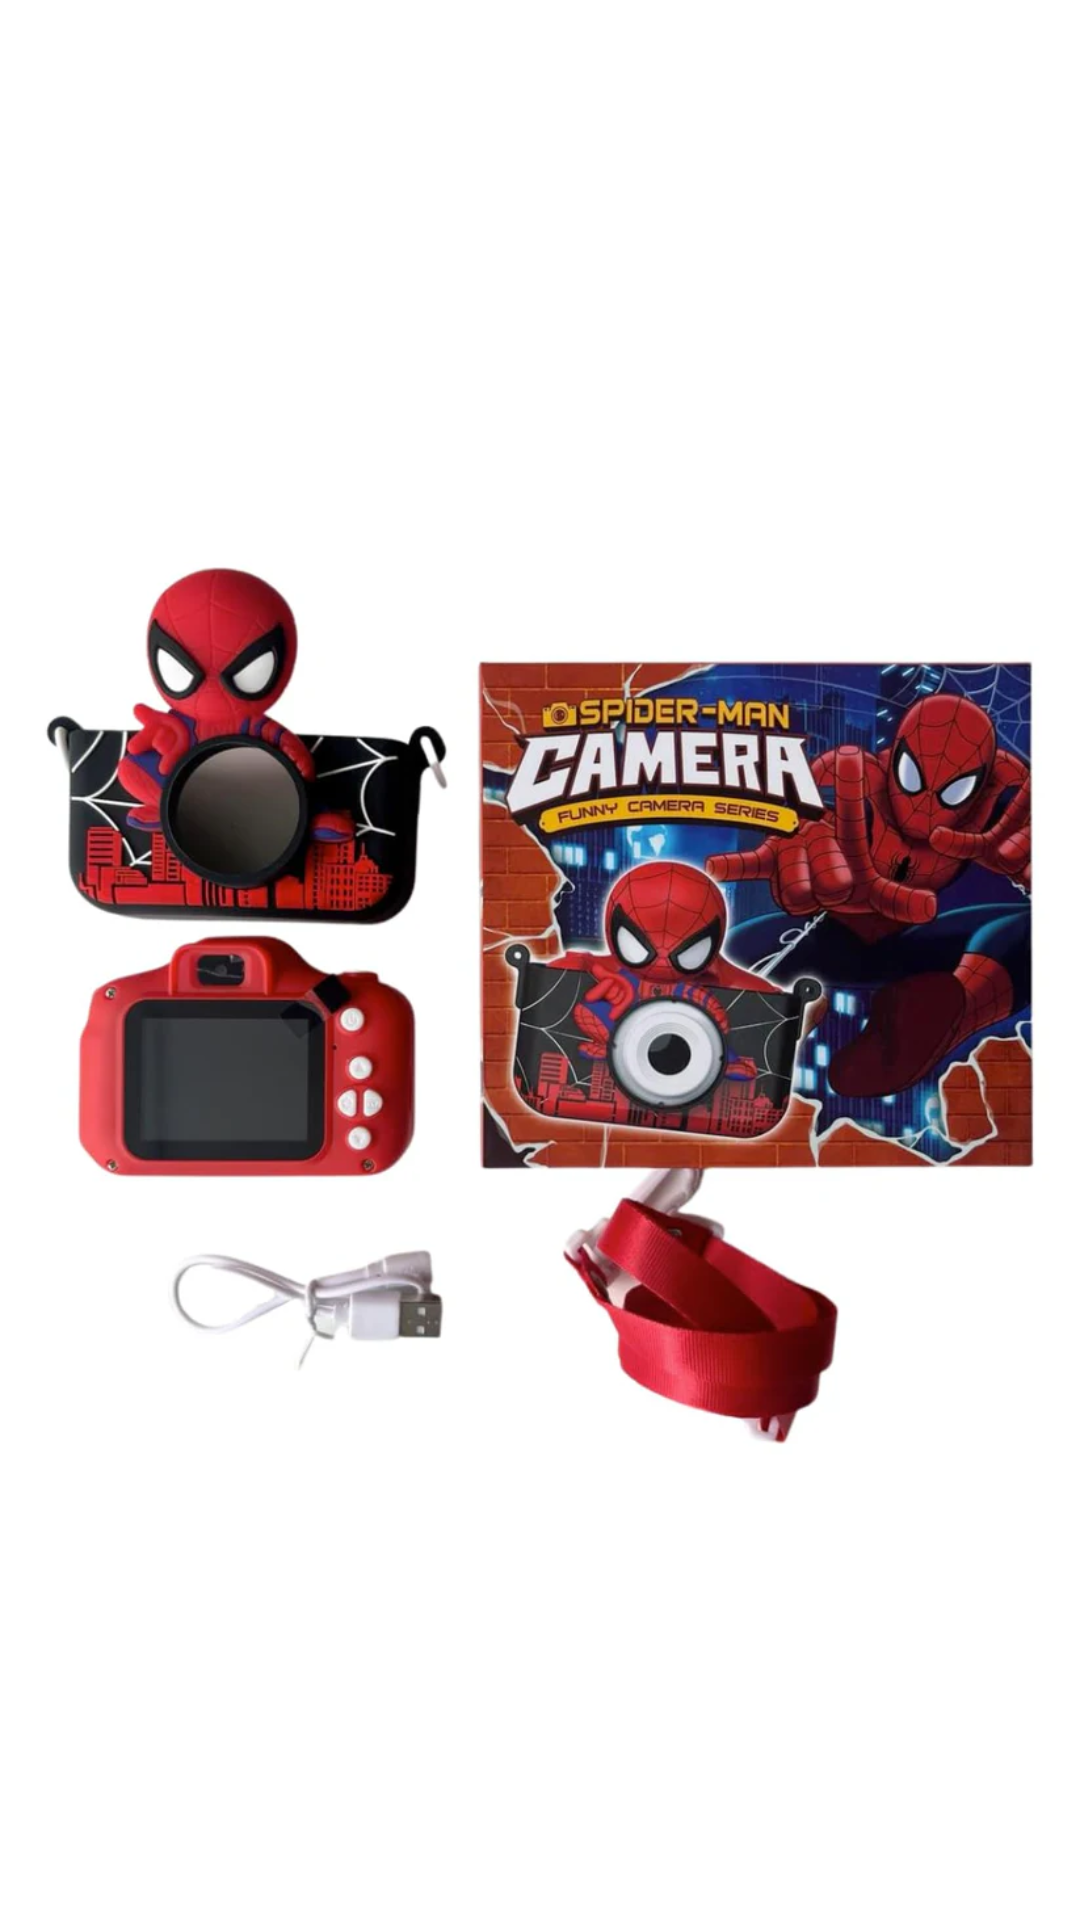 Rainbow Toys Spiderman-Themed Electronic Camera for Kids with Selfie Camera